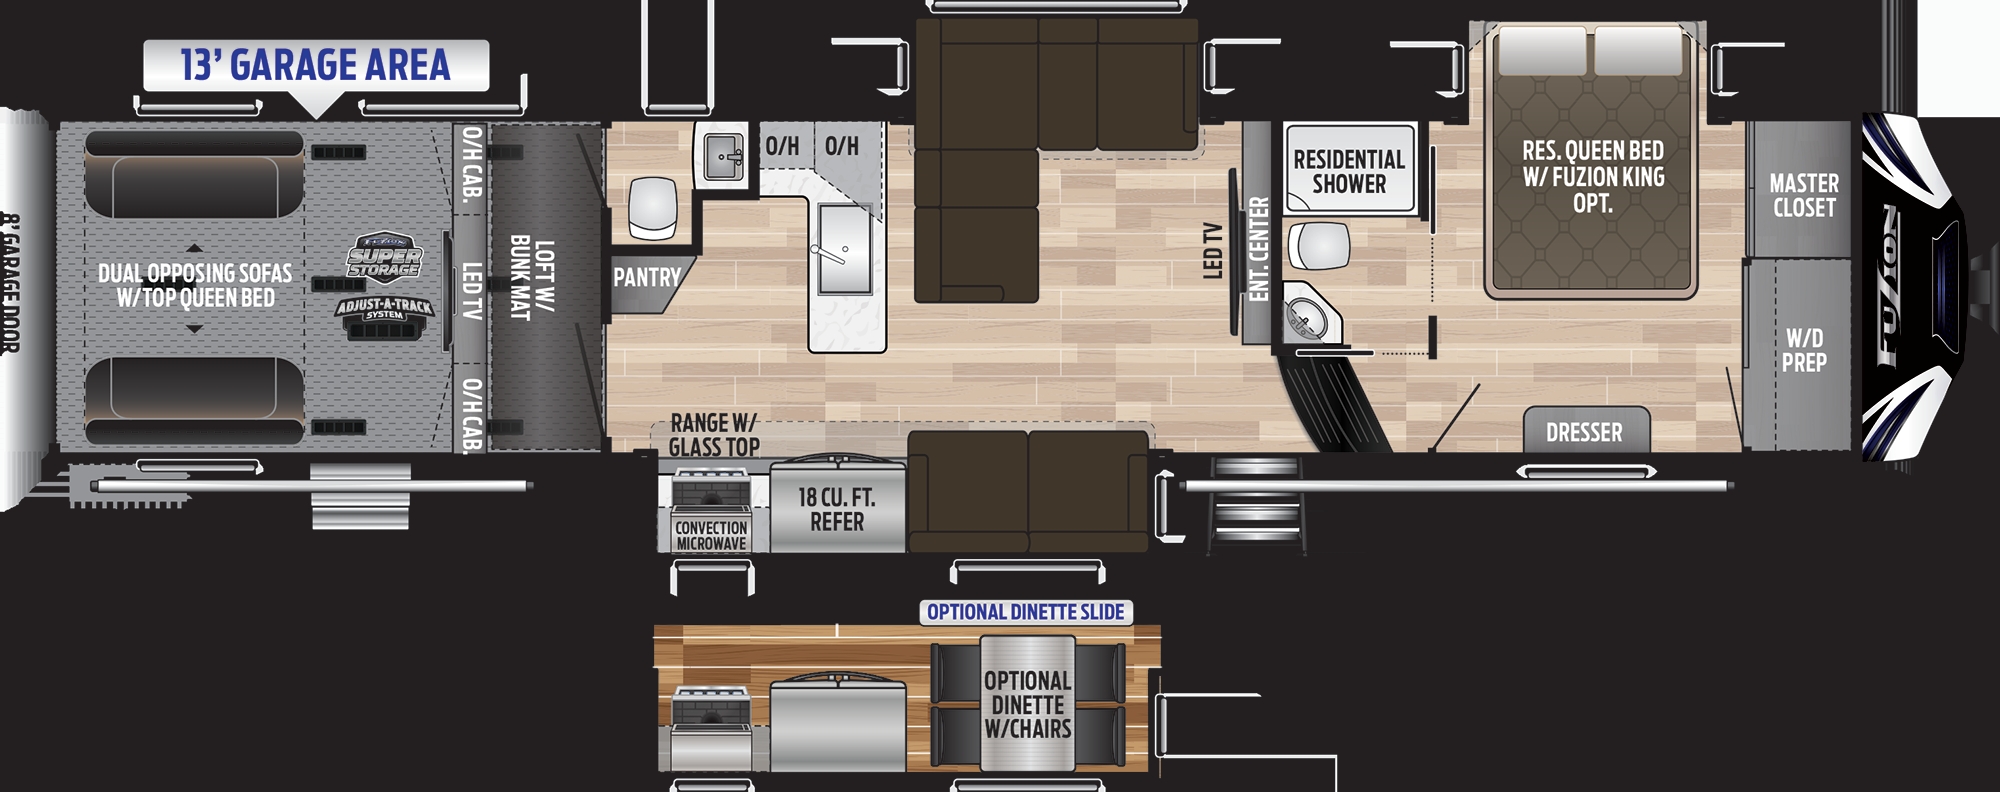 8 Pics Fuzion 5th Wheel Toy Hauler Floor Plans And Review